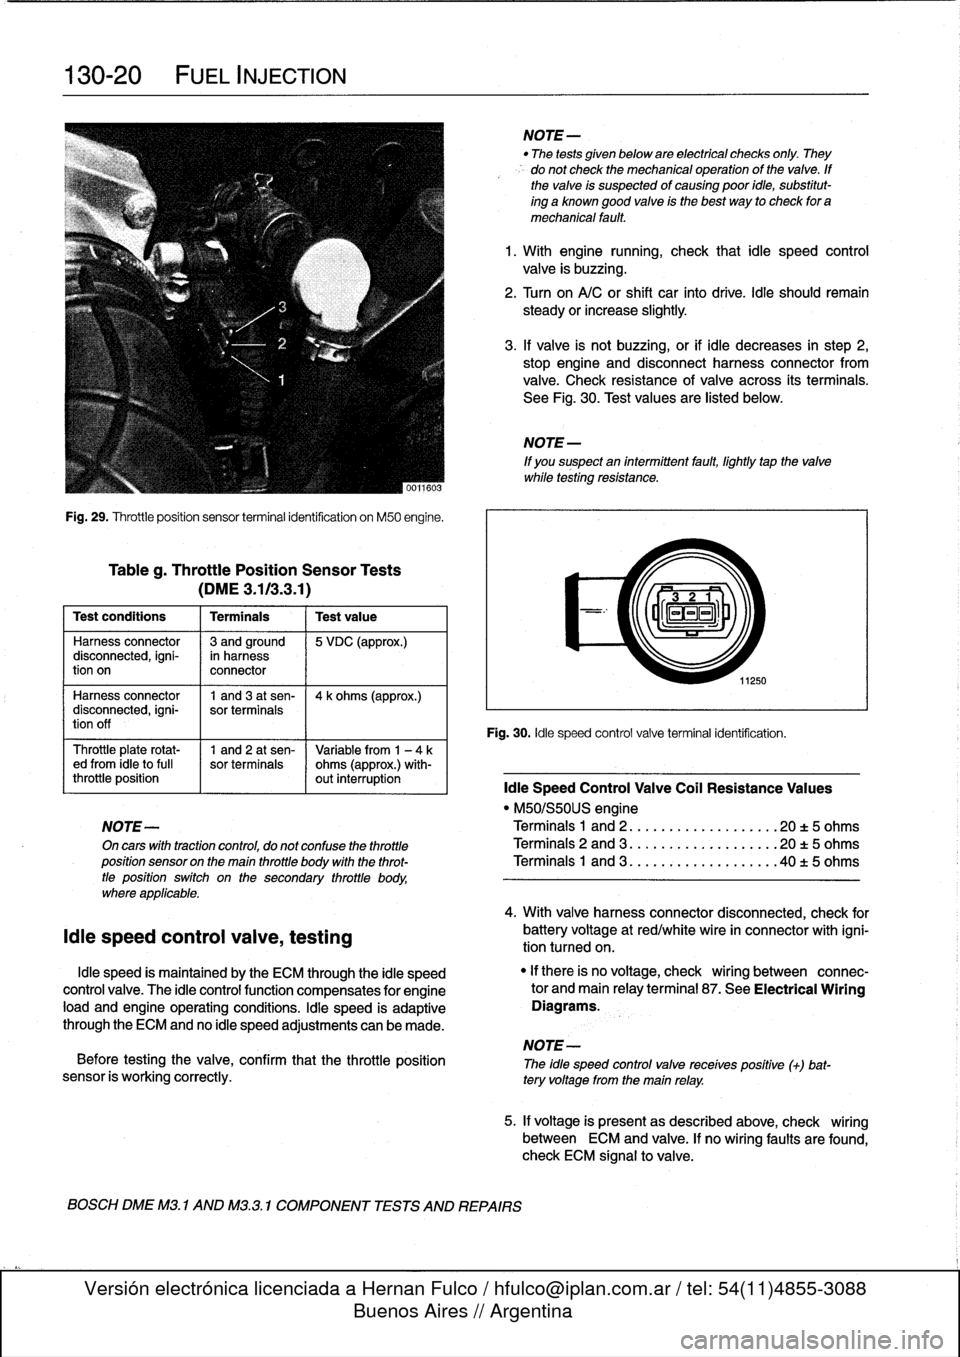 BMW 318i 1995 E36 Workshop Manual 
130-20

	

FUEL
INJECTION

Fig
.
29
.
Throttleposition
sensor
terminal
identification
on
M50
engine
.

Tableg
.
Throttle
Position
Sensor
Tests

(DME3
.113
.3
.1)

Test
conditions

	

I
Terminals

	

